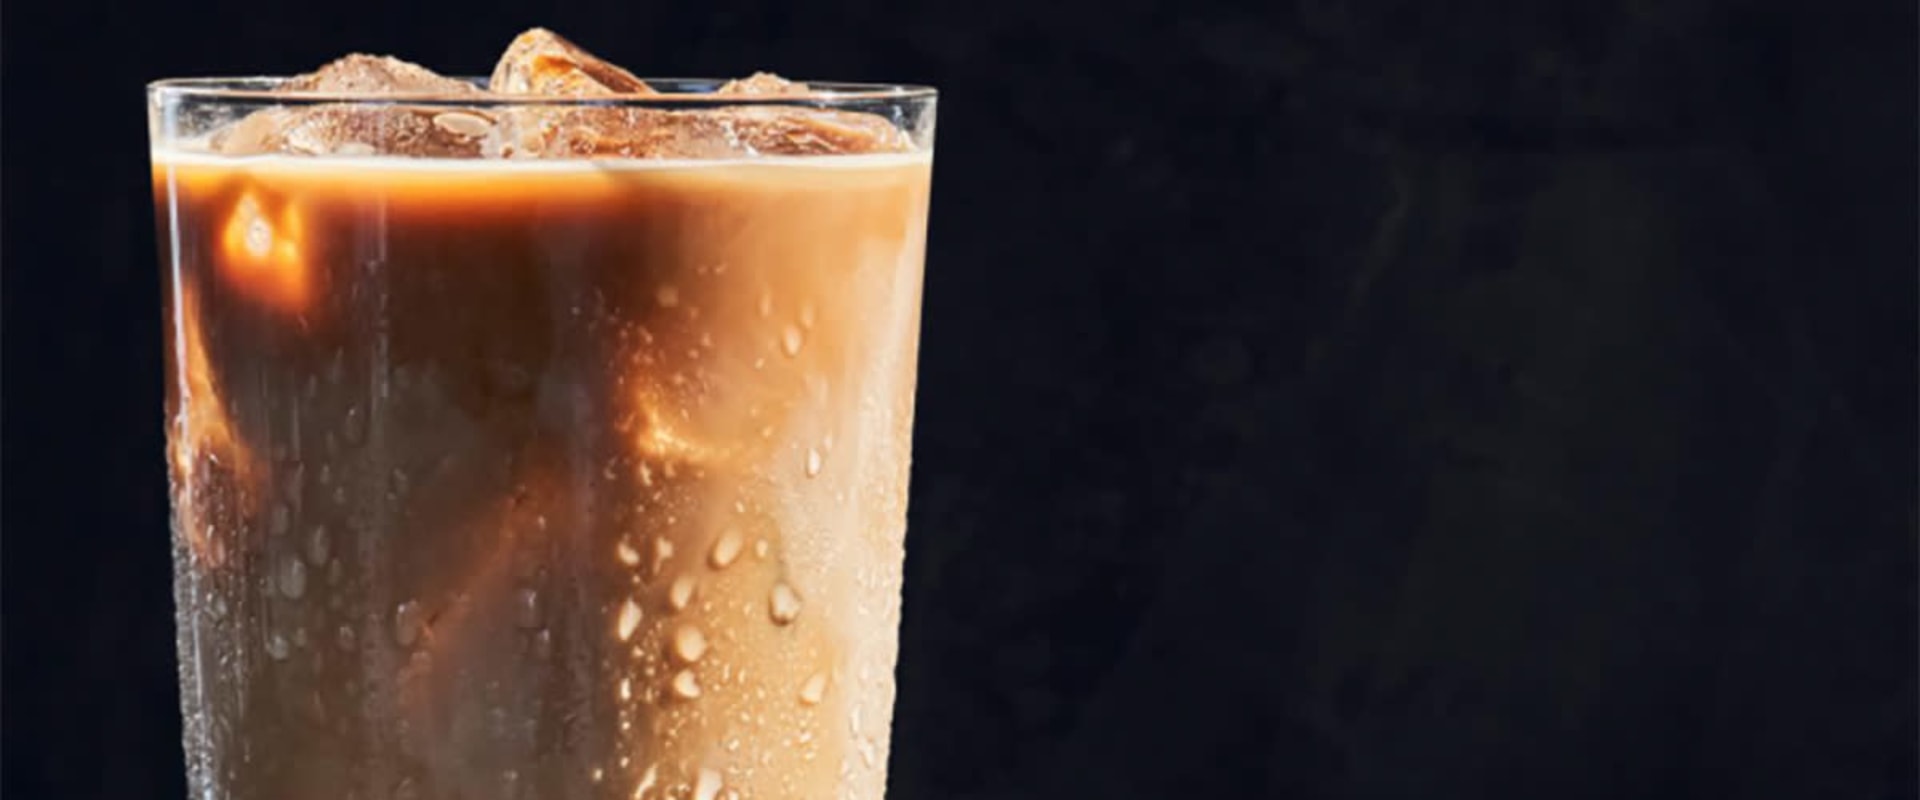 McDonald's Cold Brew Coffee: What You Need to Know